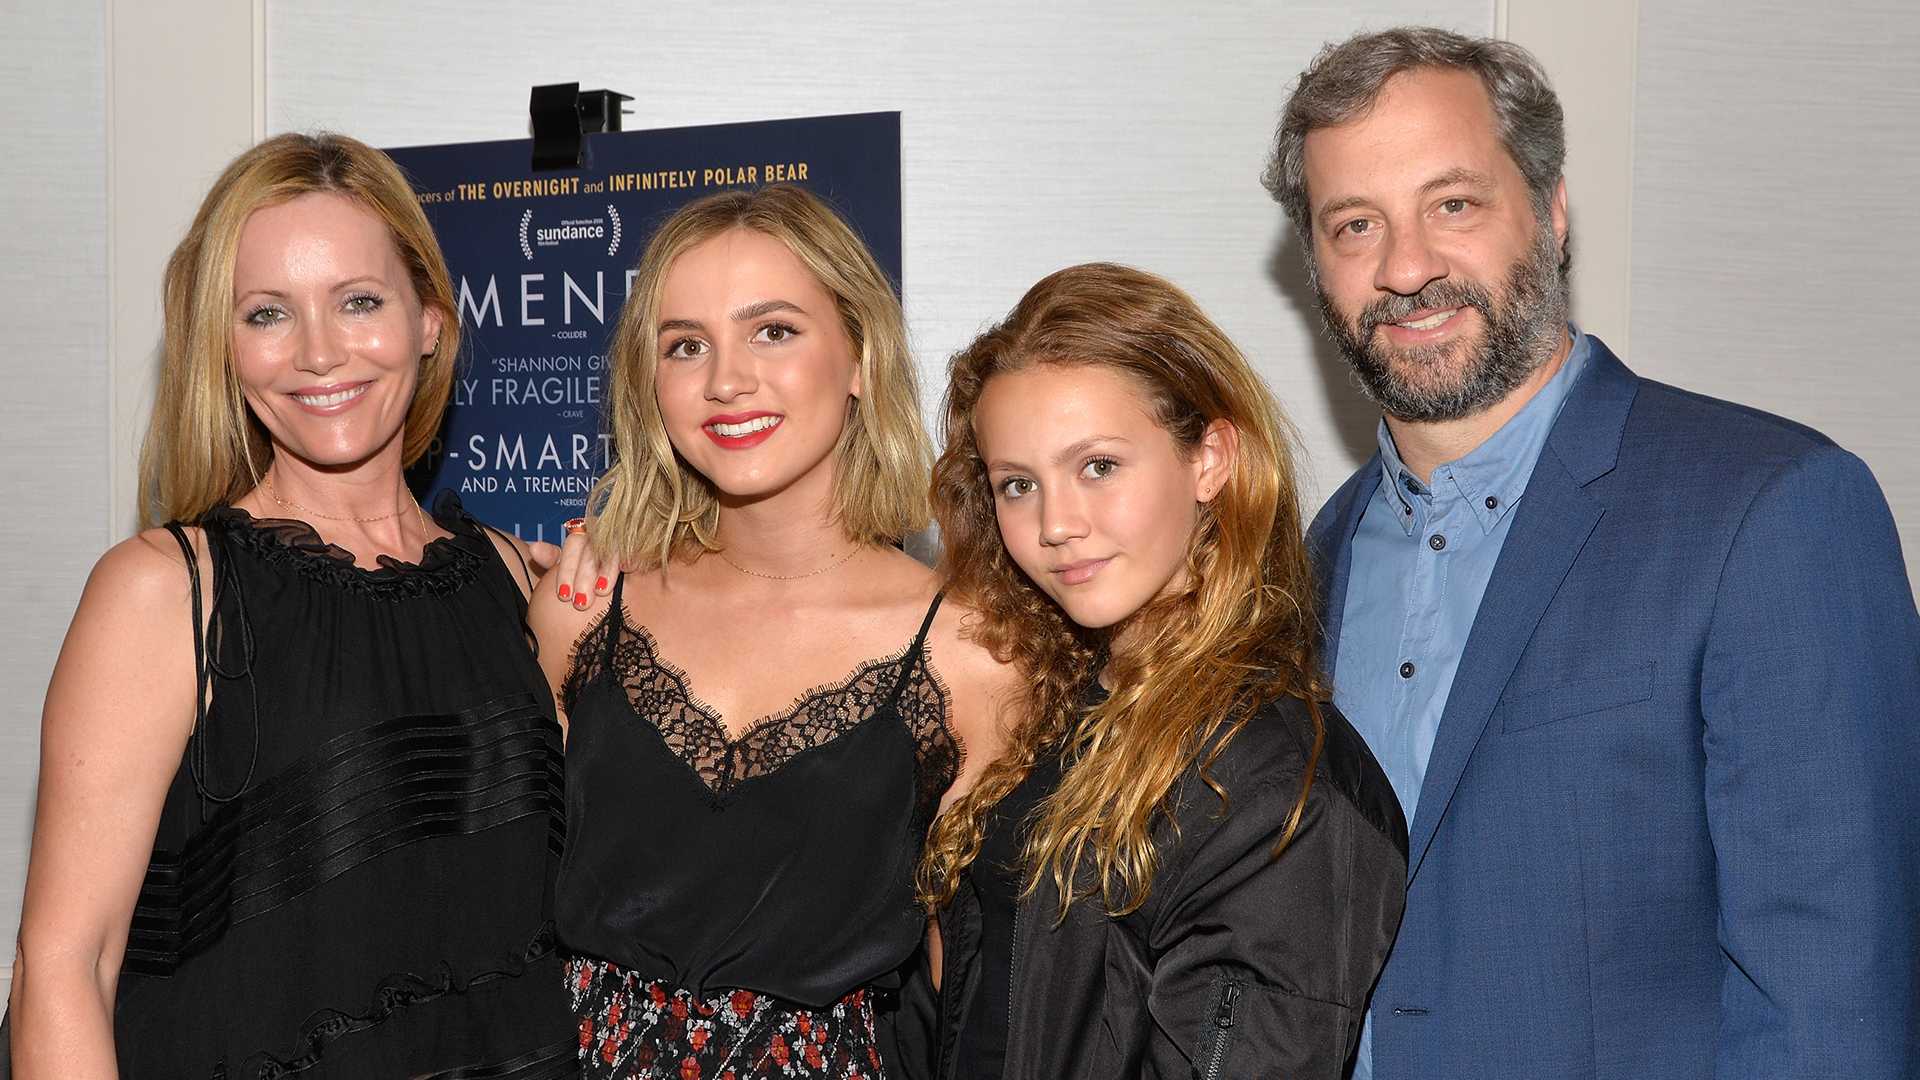 Judd Apatow Directs Wife Leslie Mann, Daughter Iris as Quarantined